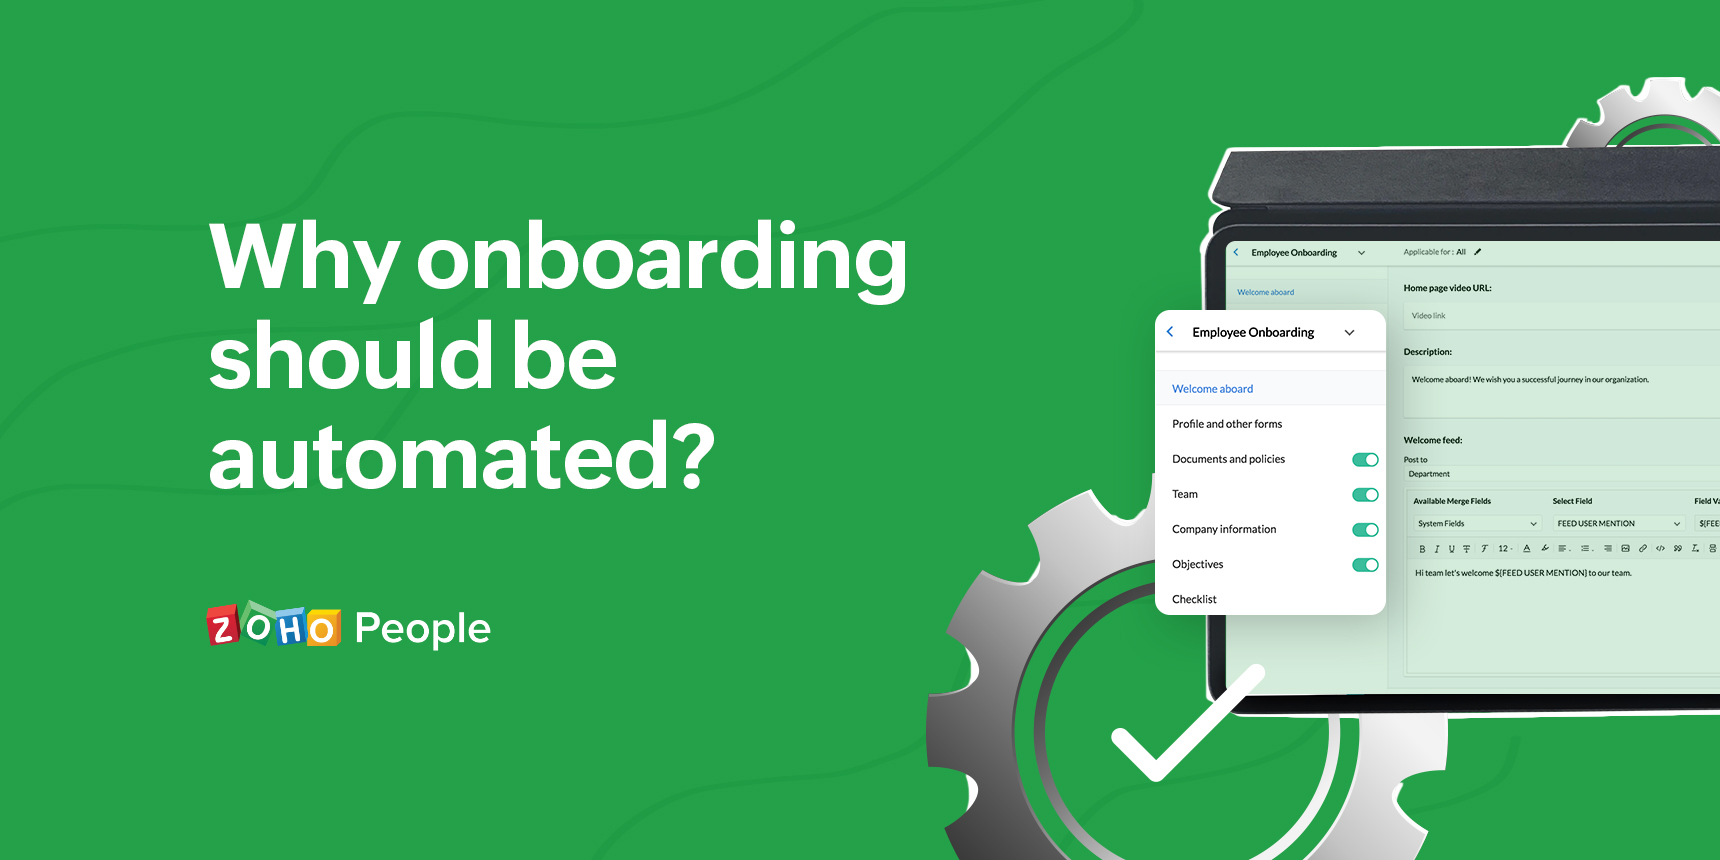 How an effective onboarding system benefits your organization